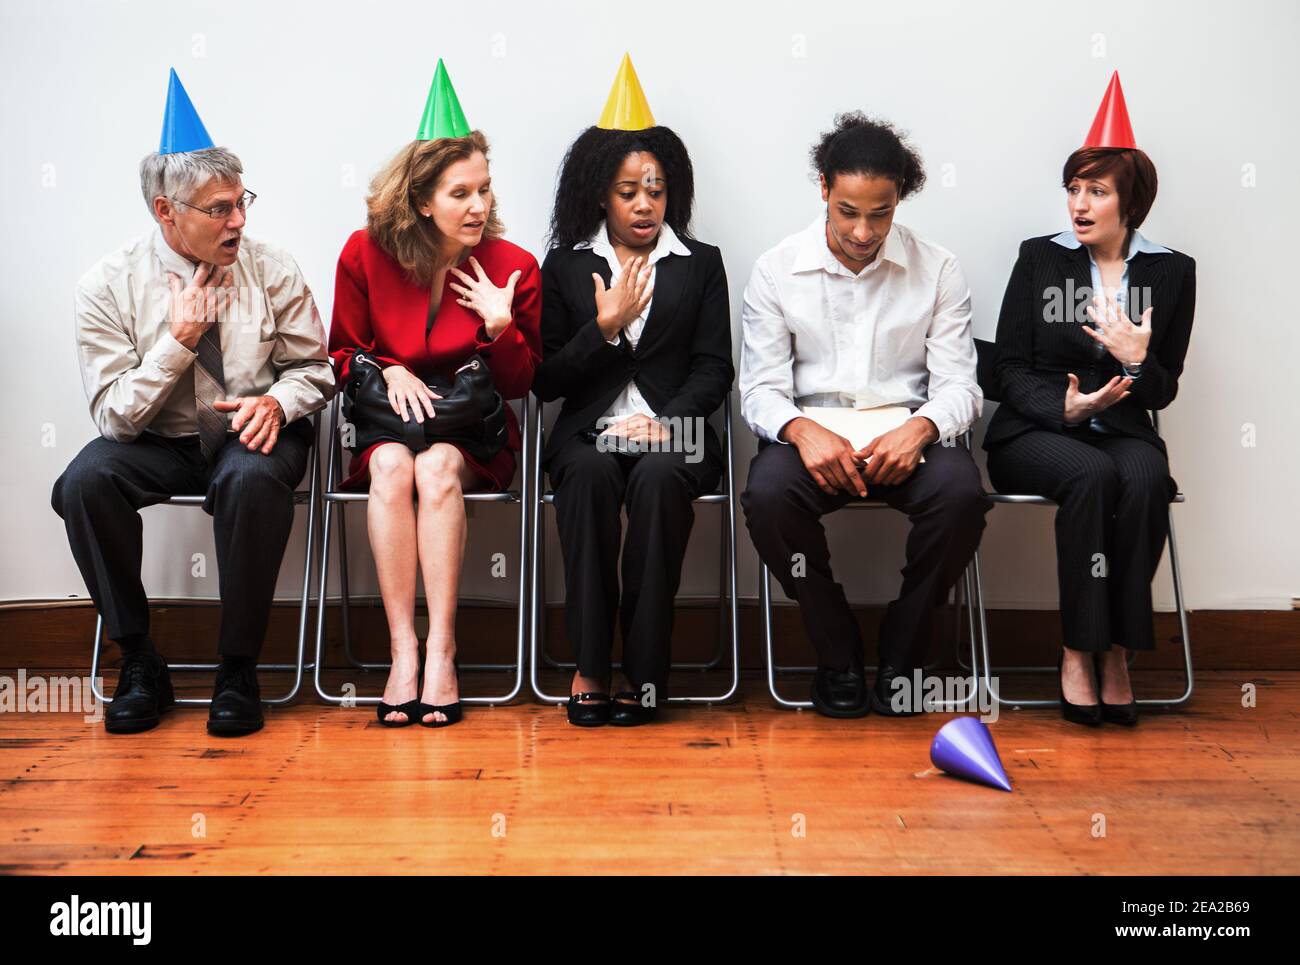 A young businessman drops his party hat while his shocked colleagues look on. Noncomformity concept. Stock Photo